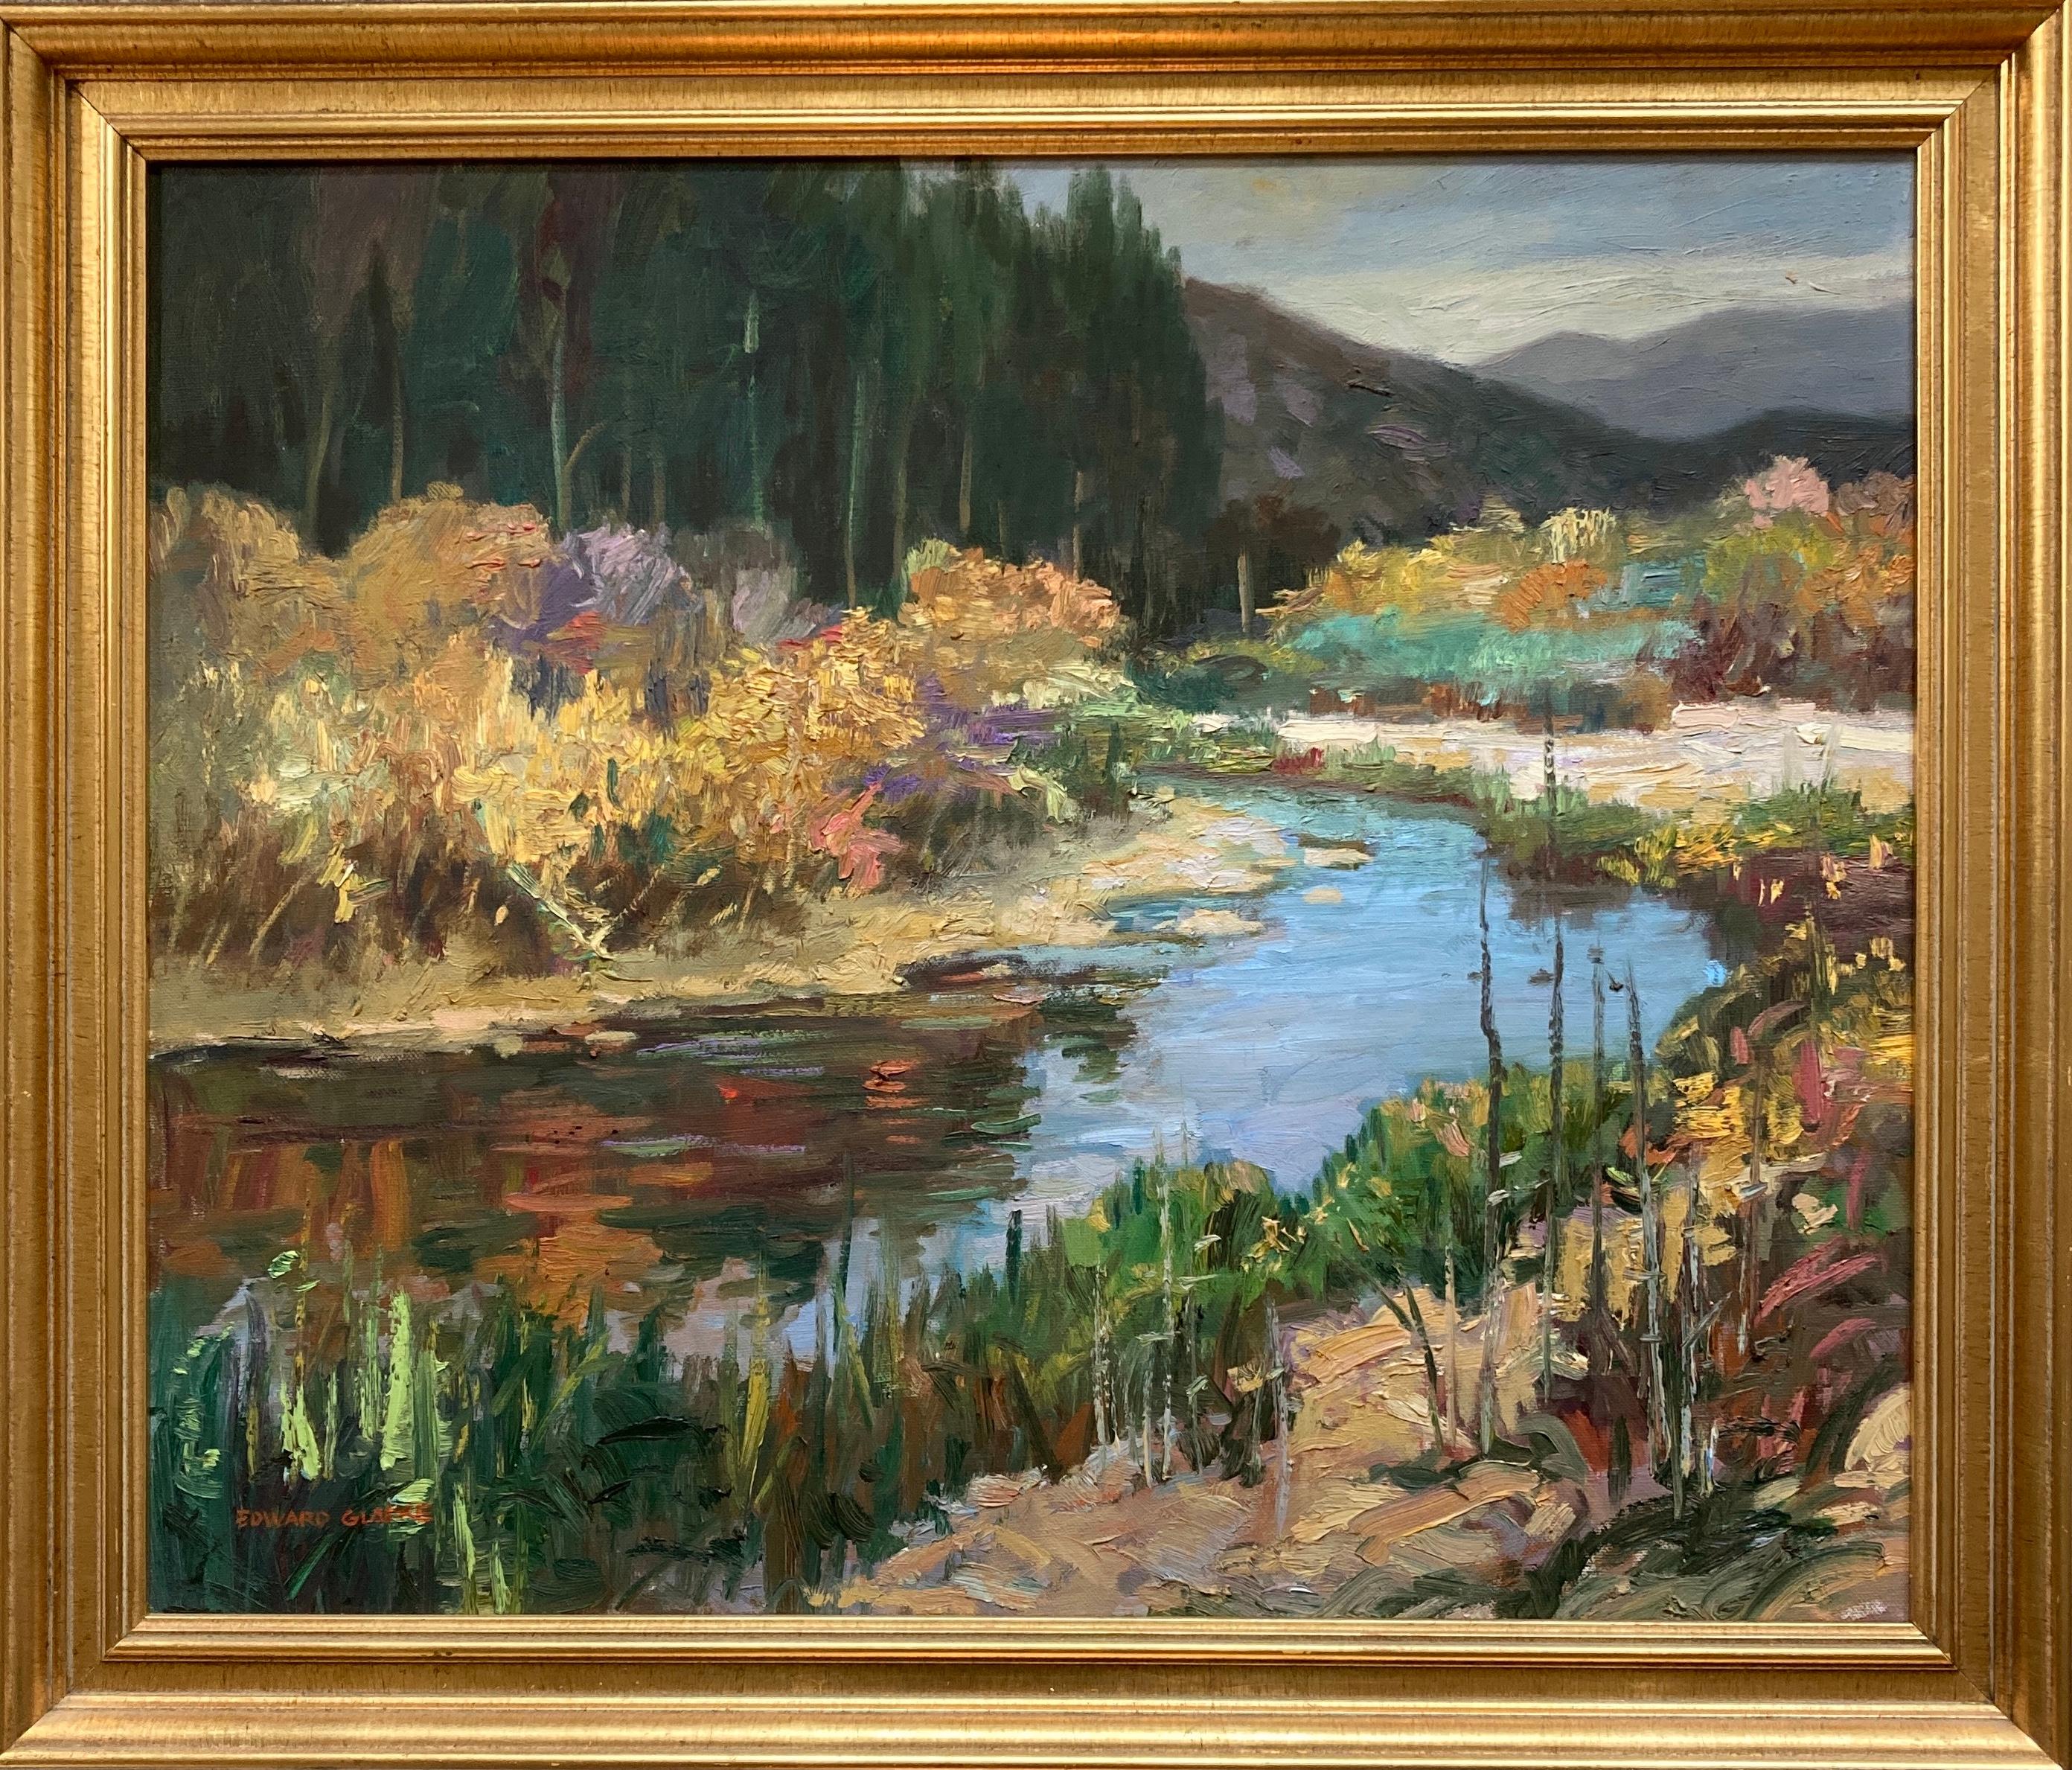 Edward Glafke (American, 1925-1997)
Carmel River
Oil on canvas
Signed lower left
Titled on the verso
Canvas: 20in H x 24in L
In a vintage giltwood frame: 24in H x 27.5 in L x 1.5in D
Edward Glafke was born in Portland Oregon and later moved with his